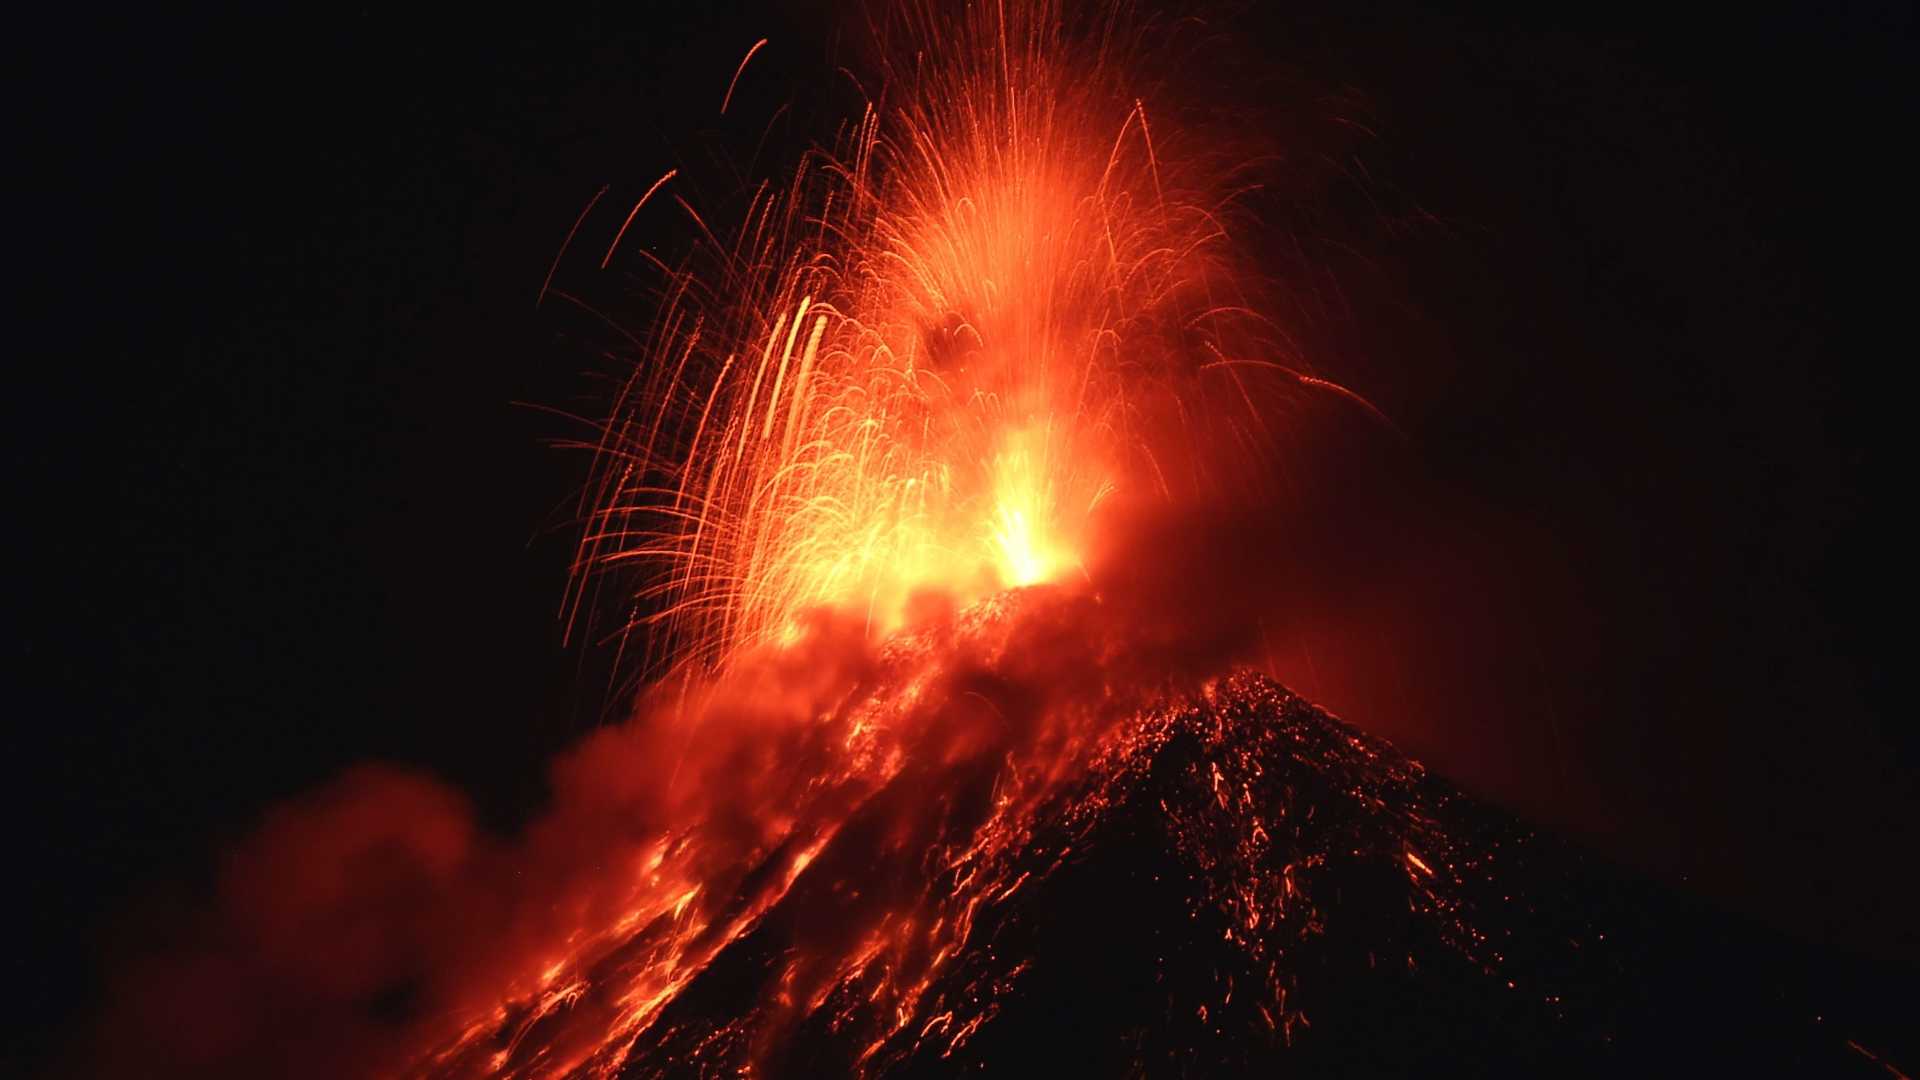 epa05750856 The Guatemalan volcano known as 'Volcan de Fuego' (lit. Volcano of Fire), one of the most active in the country, makes its first eruption of the year in , Sacatepequez, Guatemala, 25 January 2017. The National Institute of Seismology, Volcanology, Meteorology and Hydrology (INSIVUMEH) indicated in a special bulletin that the volcano's eruptive phase began at 13.45 local time (19.45 GMT), generating a column of gray ash 5,500 meters above sea level.  EPA/ESTEBAN BIBA